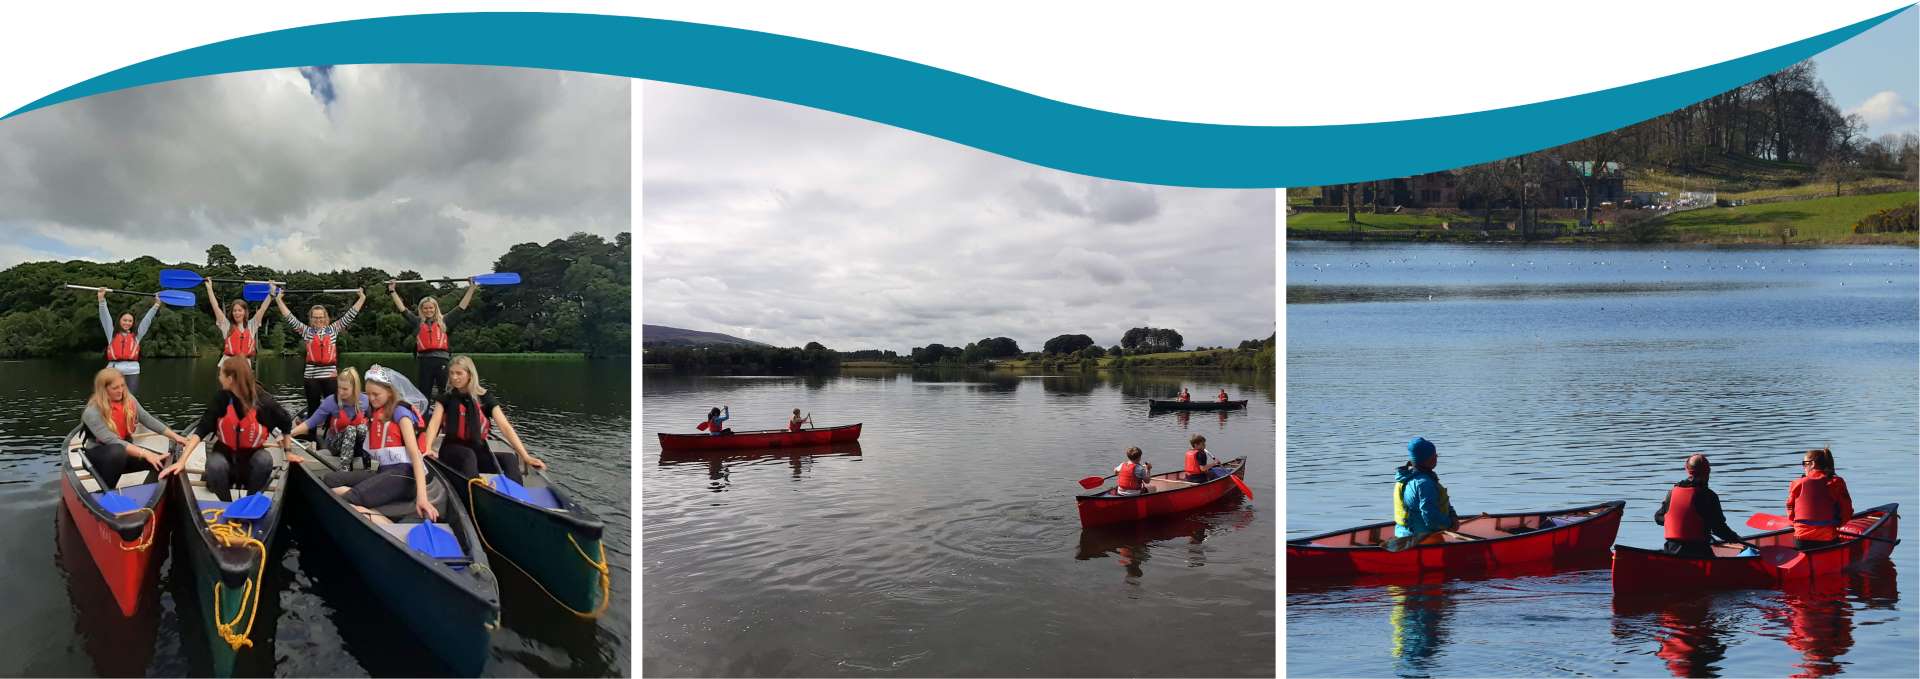 Canoeing in Cumbria - Lessons and Training